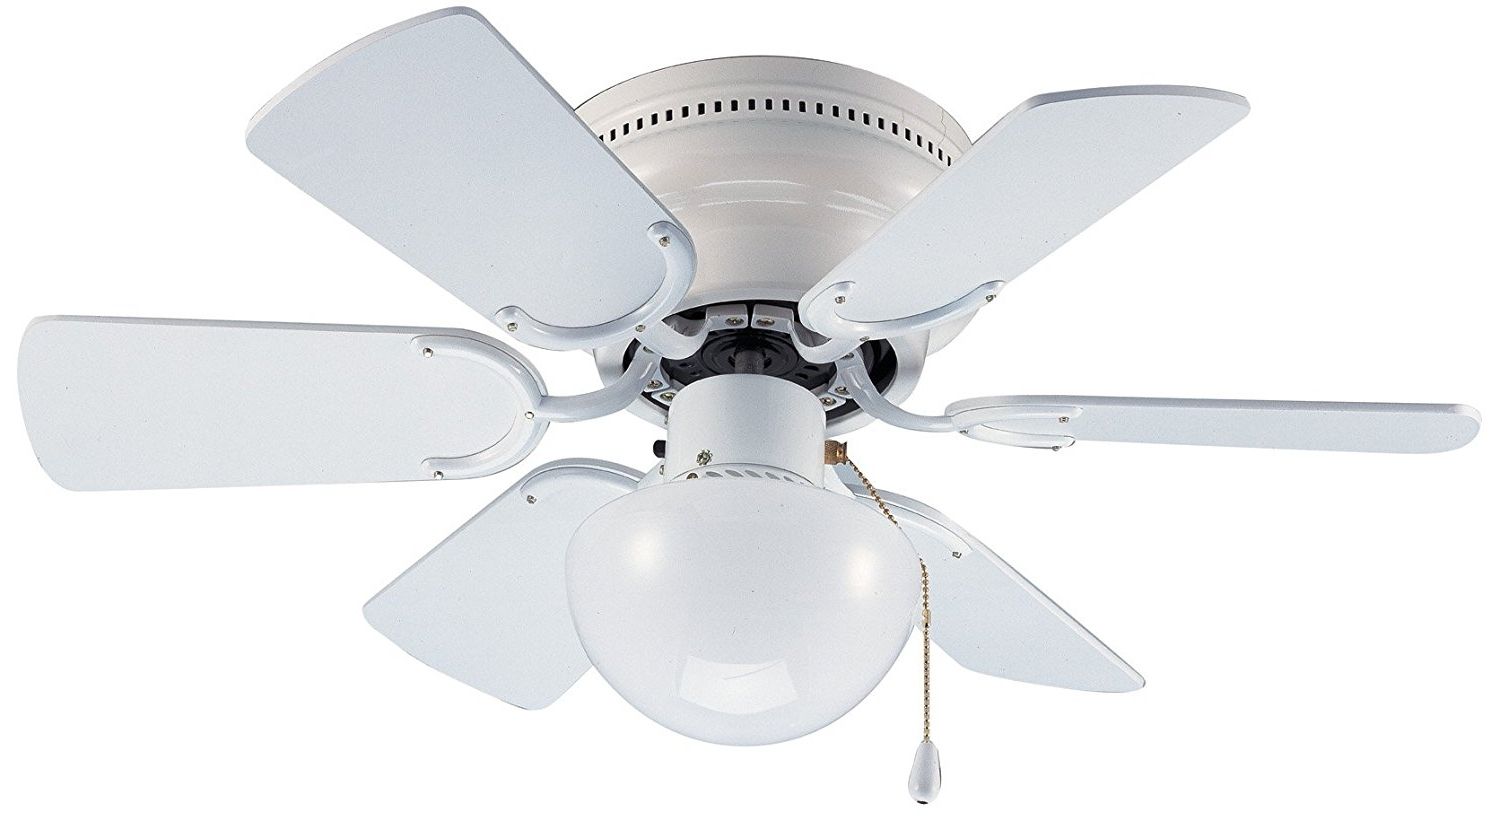 Outdoor Ceiling Fans At Amazon Within Recent Ceiling: Astonishing Amazon Outdoor Ceiling Fans Ceiling Fans Home (View 16 of 21)